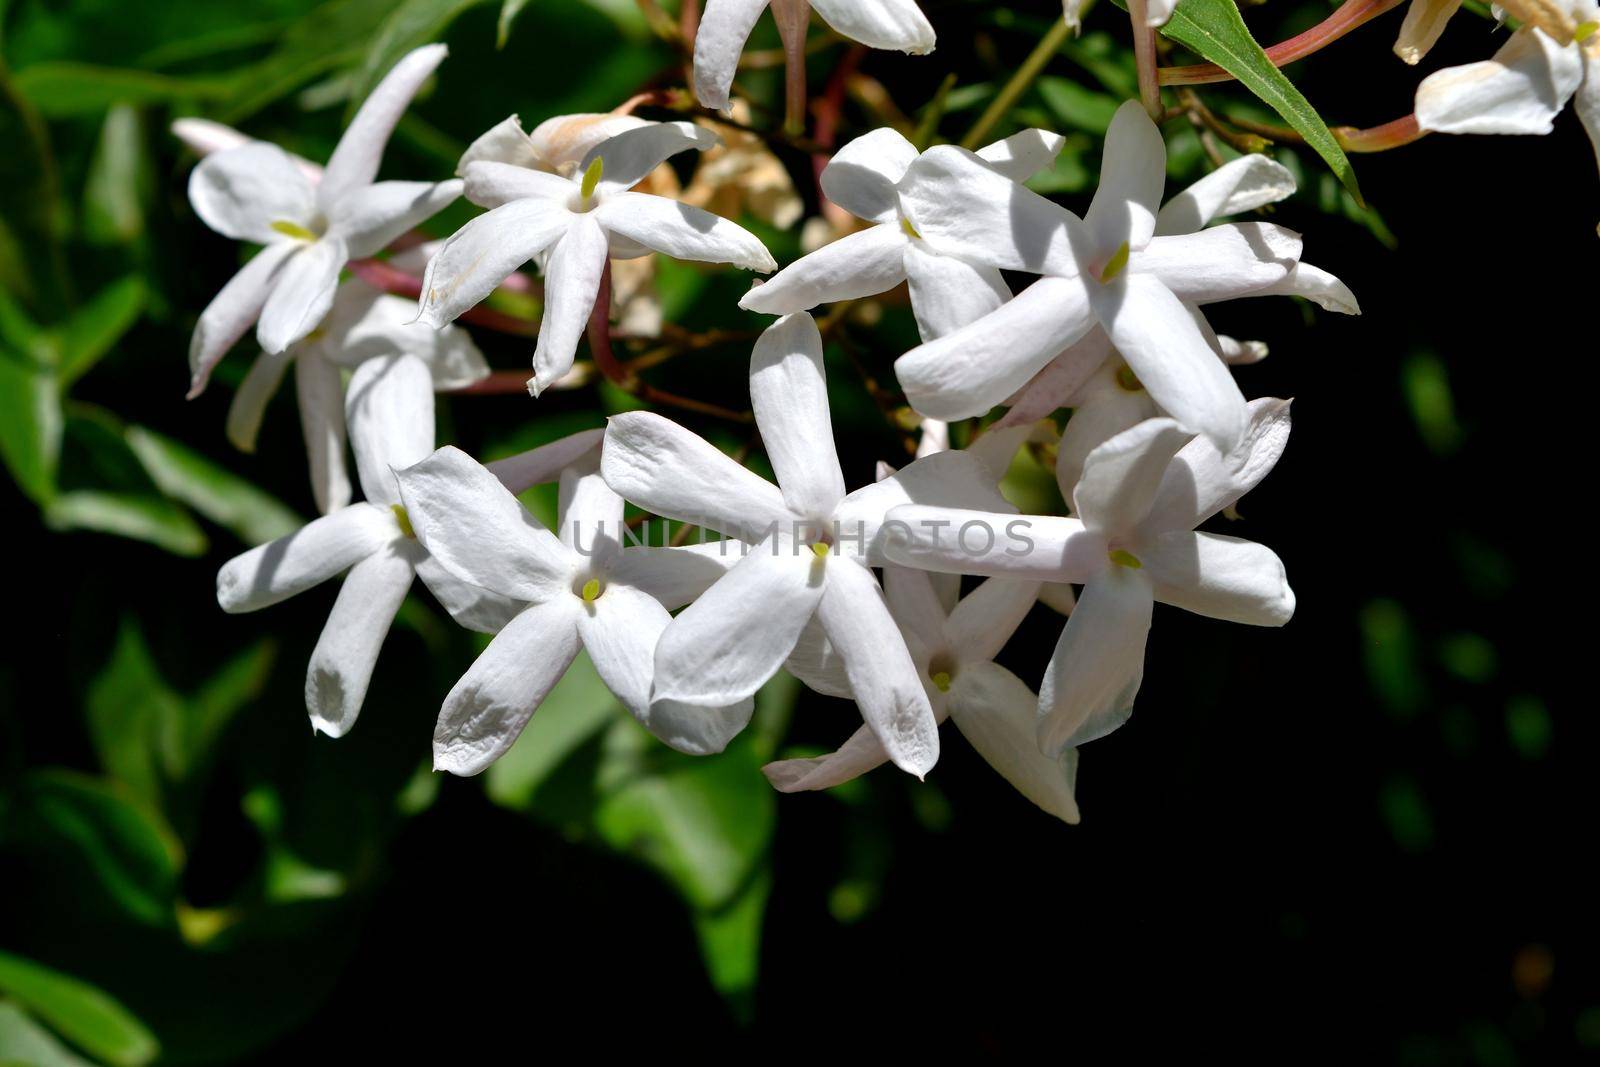 A closeup of freshly blossomed trachelospermum jasminoides flowers by silentstock639